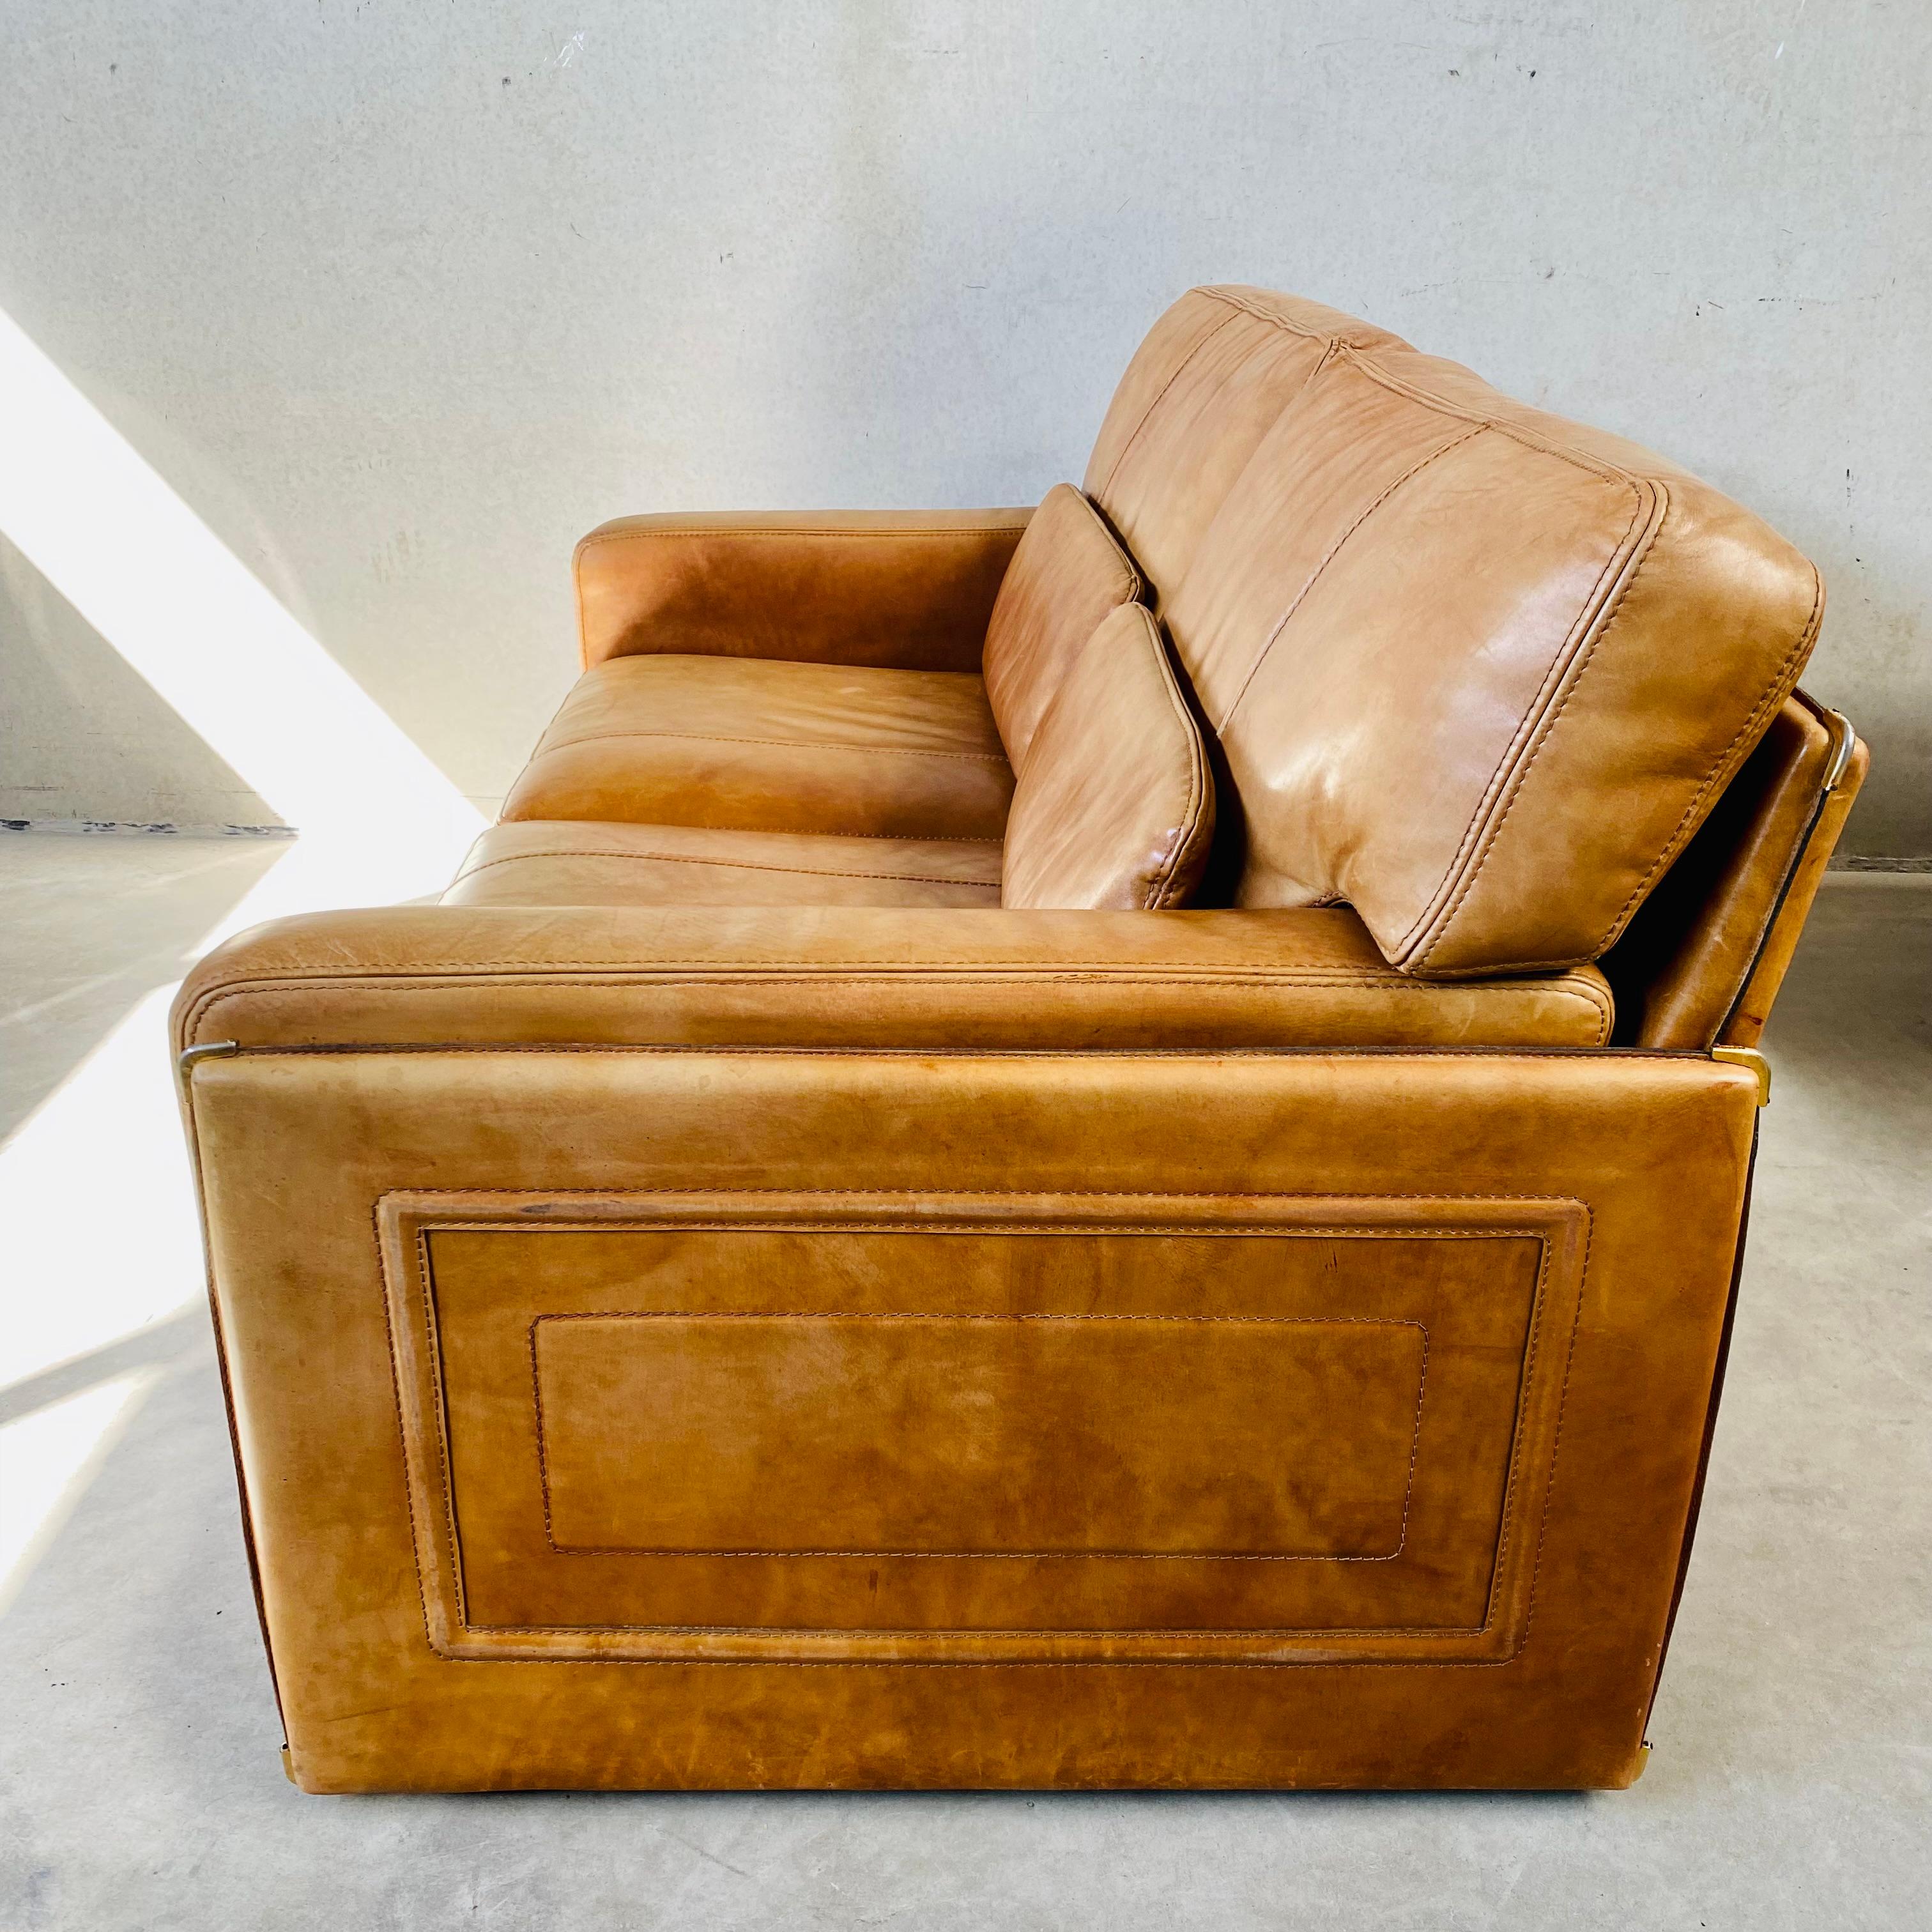 Cognac Leather 2-Seater Sofa by MarCo Milisich for Baxter, Italy, 1970 For Sale 3